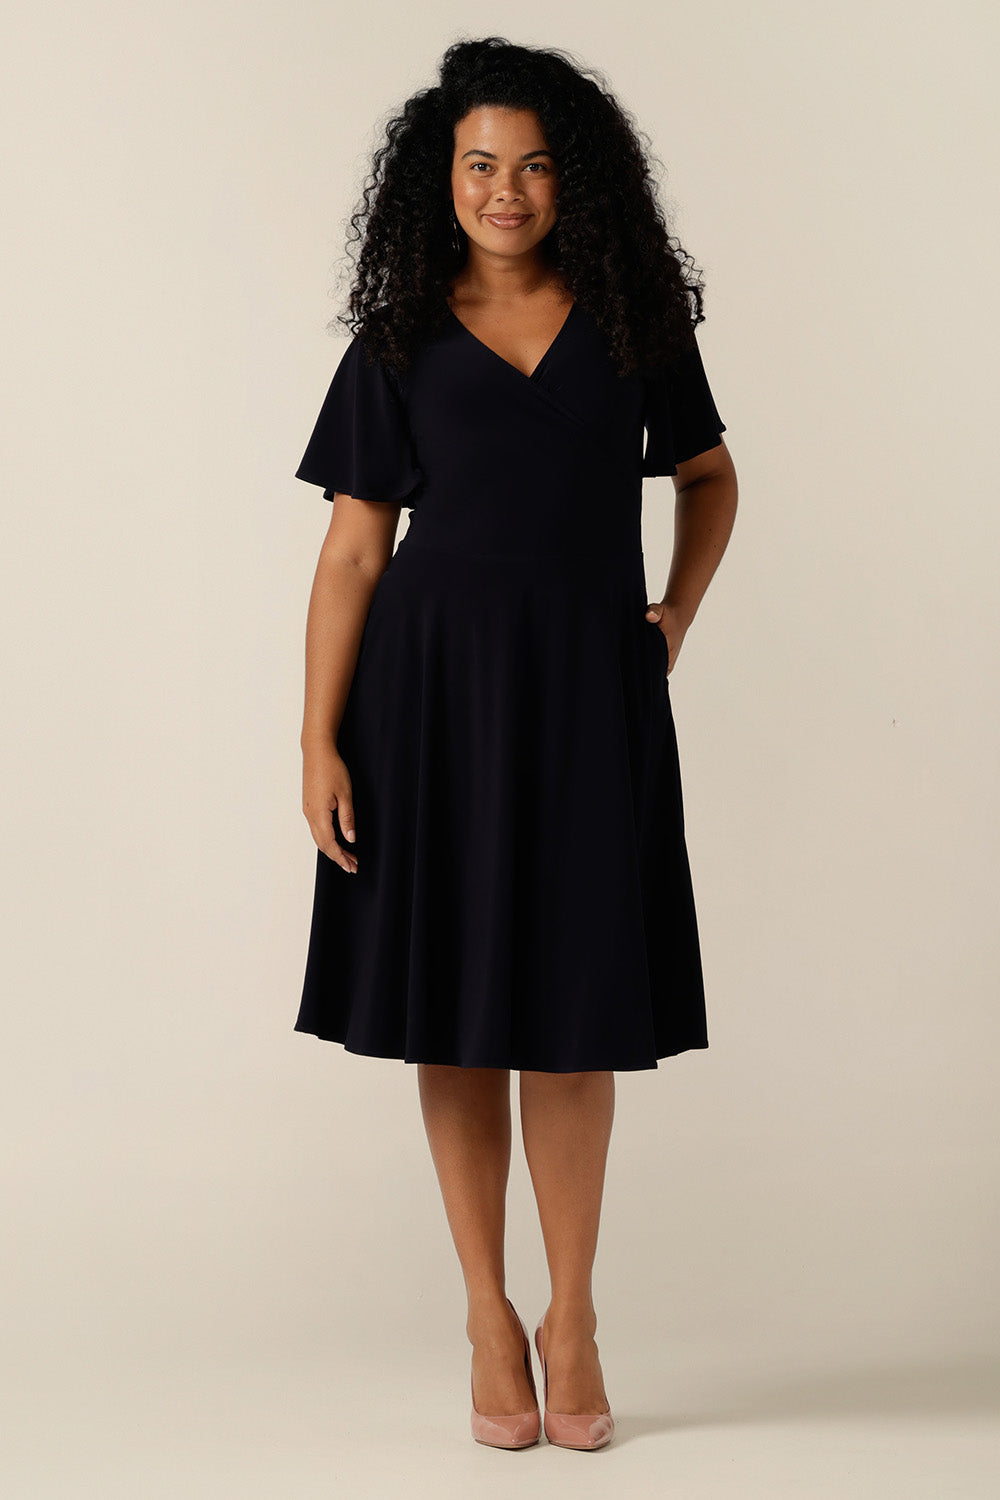 size 12, curvy woman wearing a reversible fixed wrap dress in navy jersey. The dress features flutter sleeves, knee length skirt and pockets. the reversible style of the dress allows her to be worn with a wrap front (as shown) or as a boat-neck dress. Designed as a work wear or evening dress, it is made in Australia for petite to plus sizes by women's clothing label, Leina and Fleur